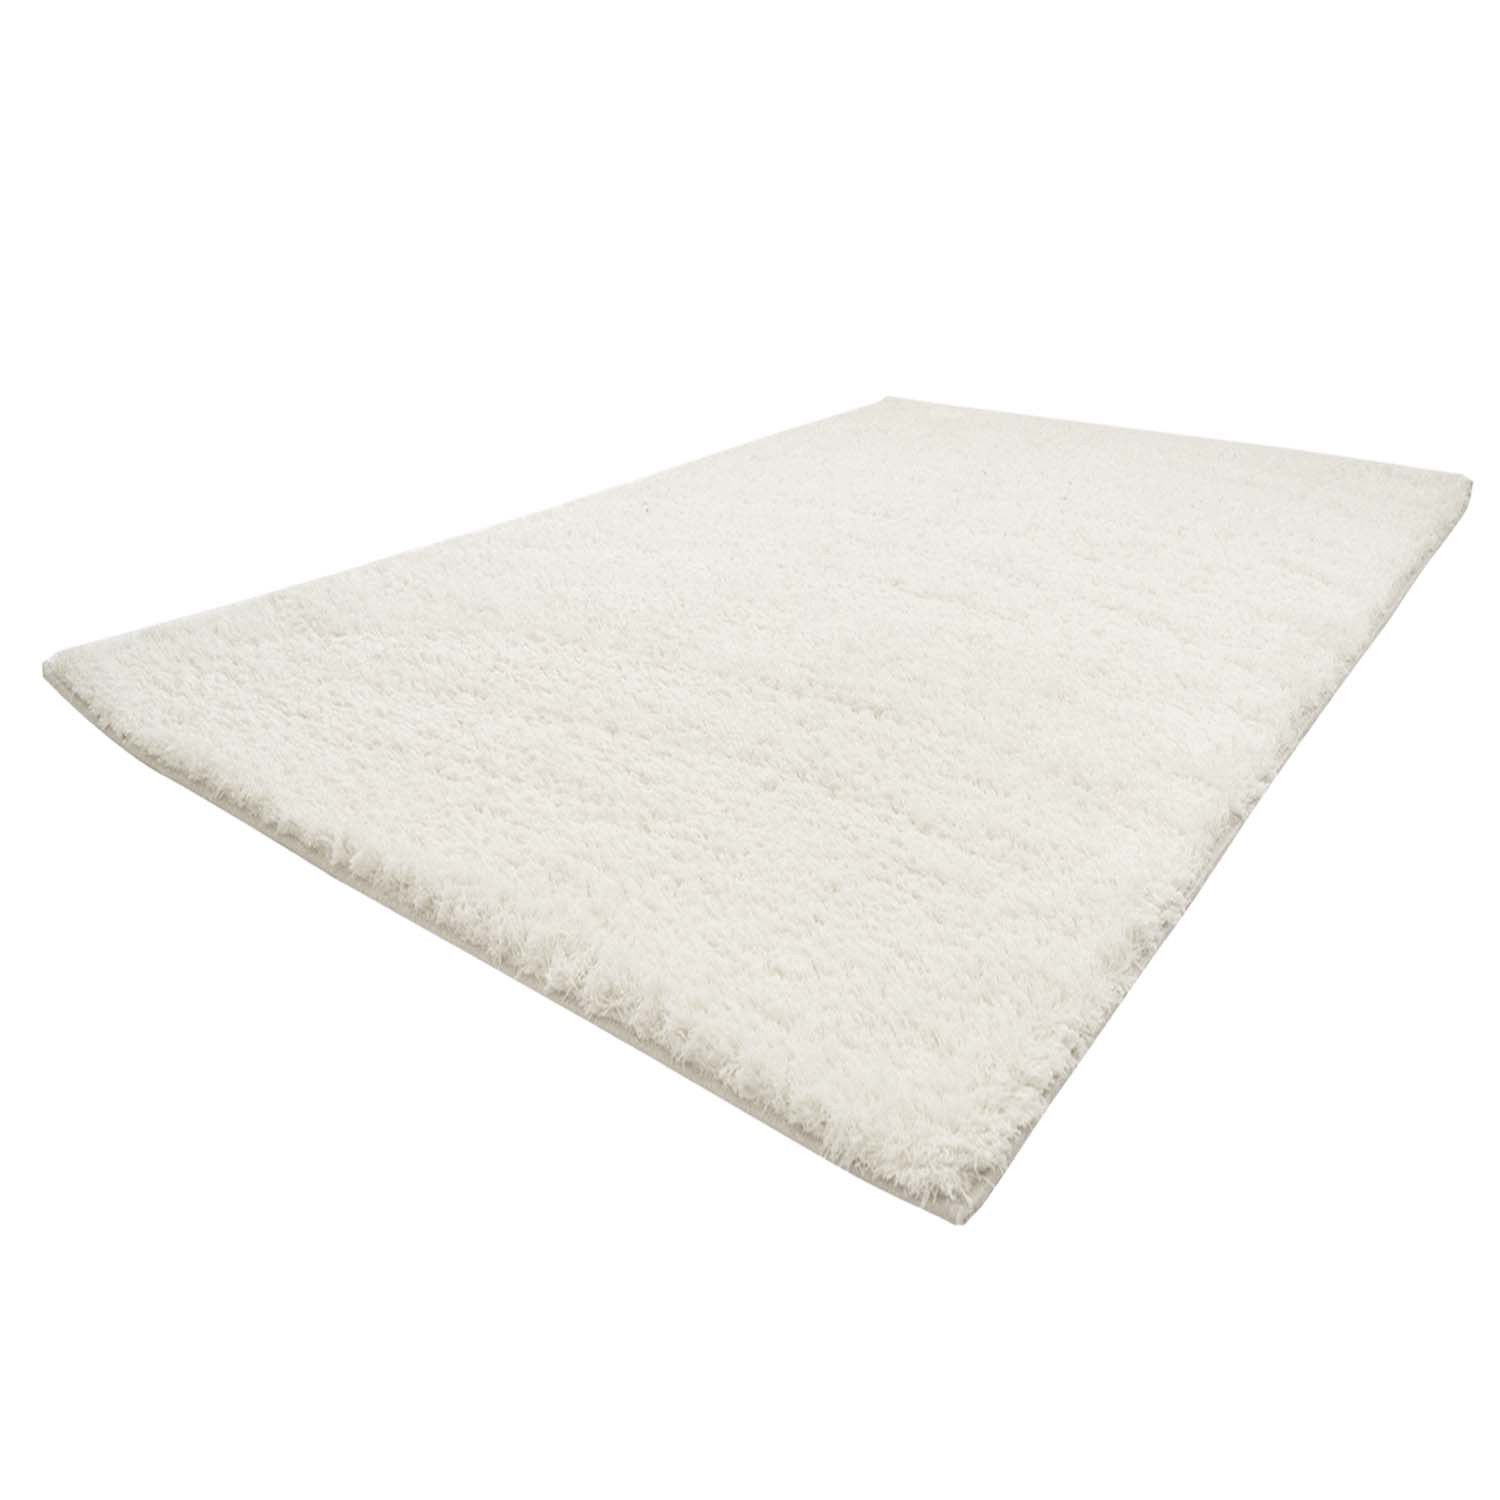 Buy Carpets And Rugs Online I Best Carpets Online I Rugs Store Uk I  Trendcarpet Intended For White Soft Rugs (View 11 of 15)